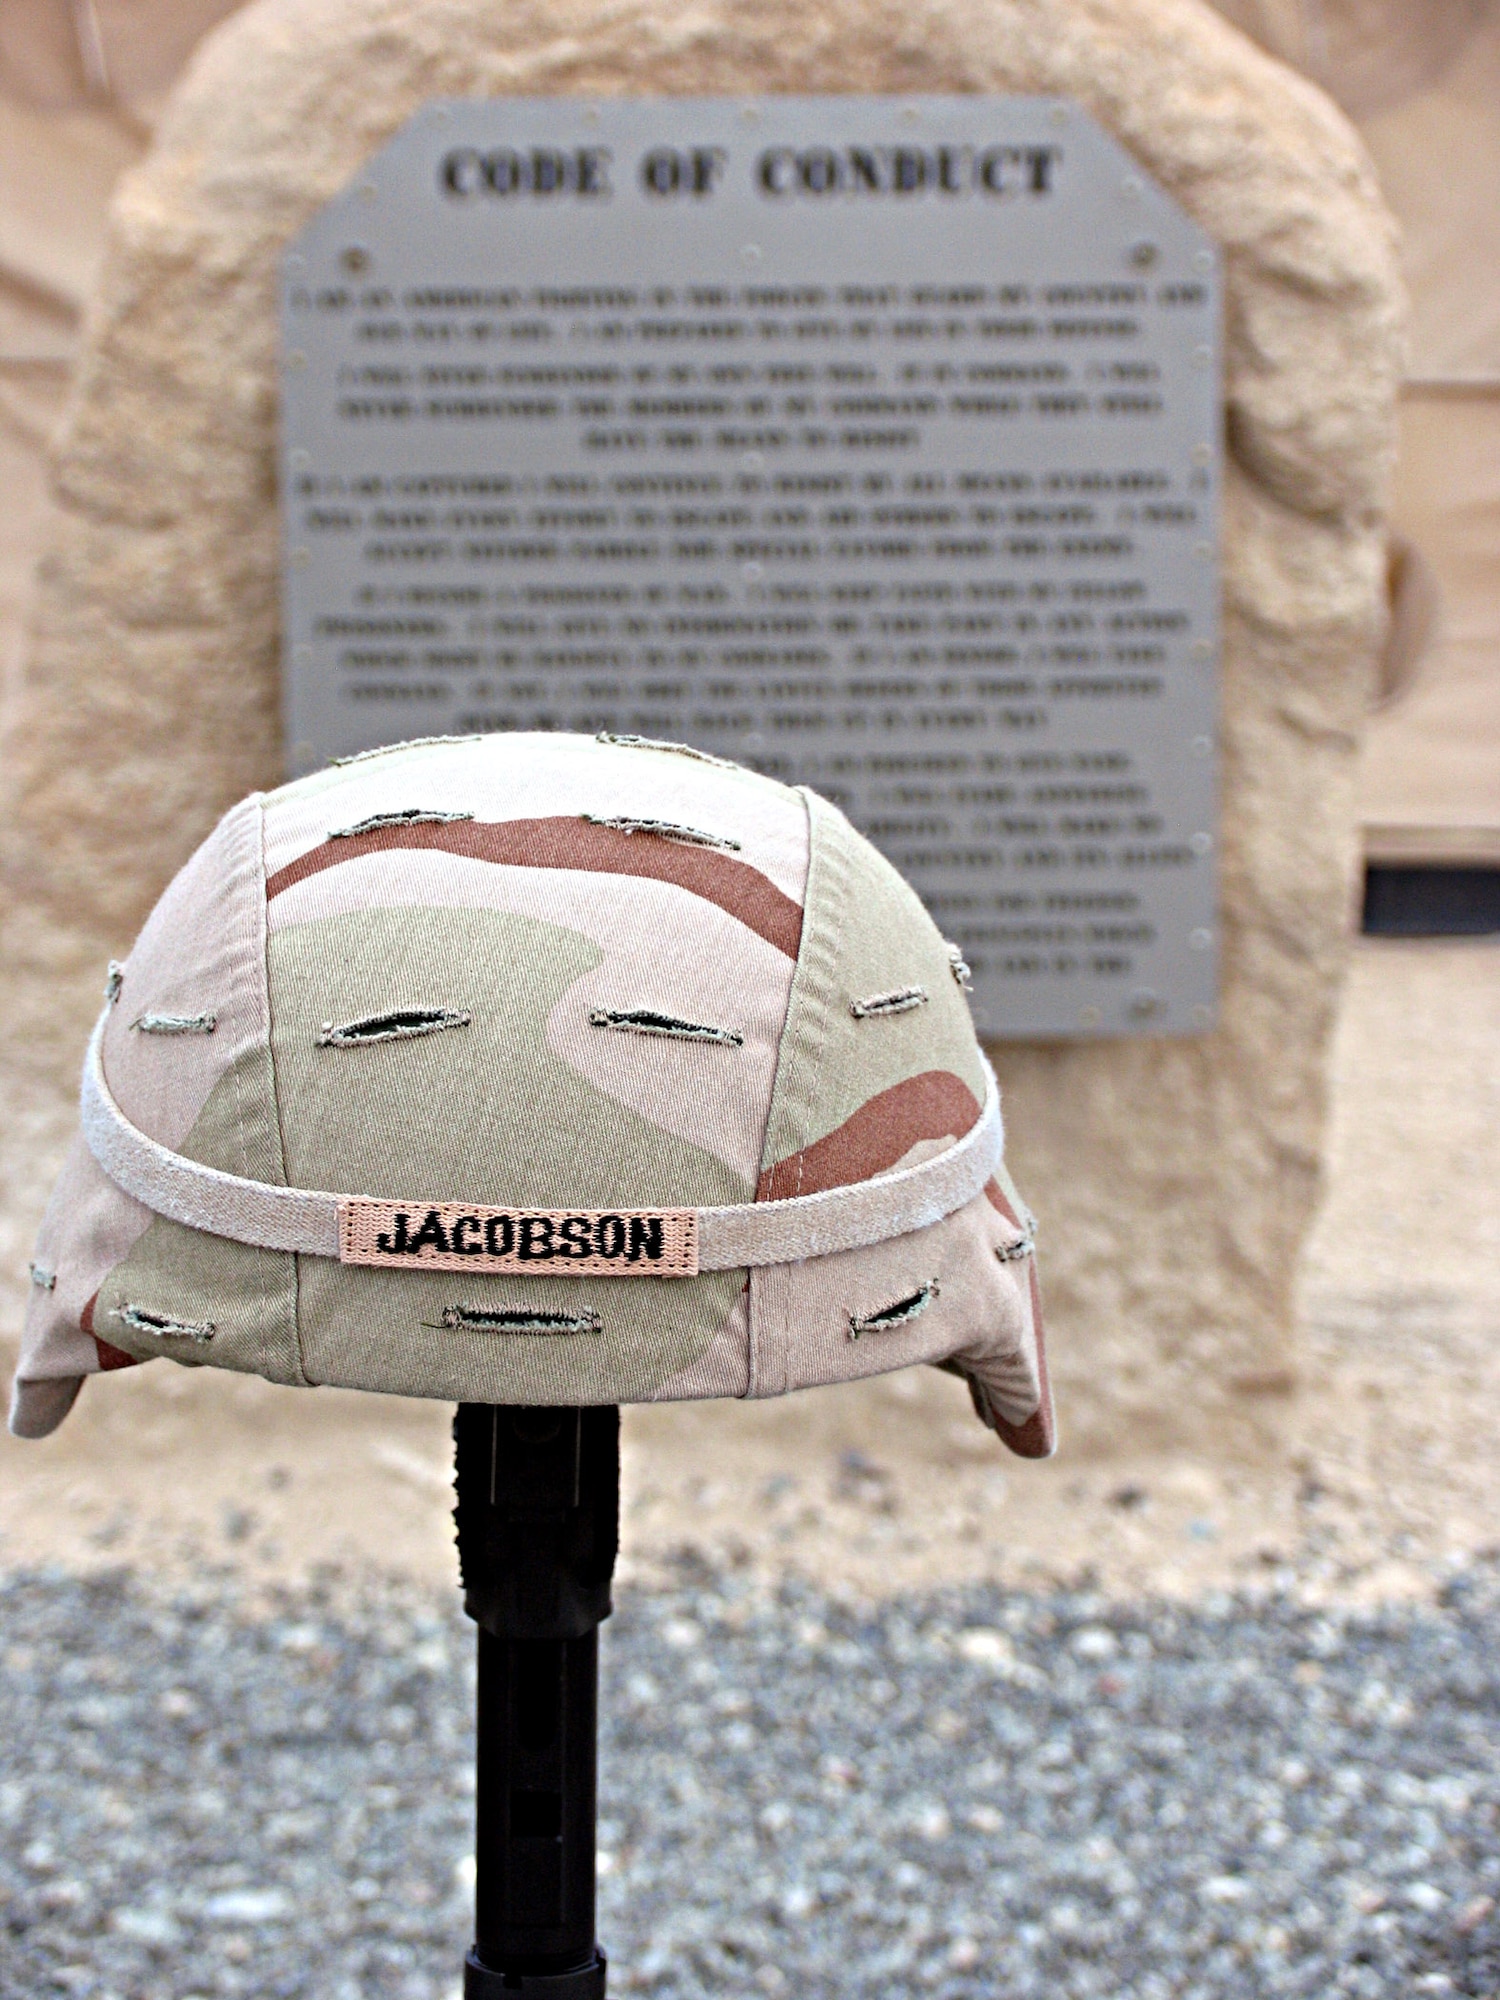 This display was built by members of the 386th Expeditionary Security Forces Squadron for a remembrance ceremony to honor veterans, including Airman 1st Class Elizabeth Jacobson, who was killed while on a convoy near Camp Bucca, Iraq.  Her vehicle was hit by an improvised explosive device on Sept. 28, 2005. She was the first female Airman killed in the line of duty supporting Operation Iraqi Freedom. (U.S. Air Force photo/Capt. Jeff Clark)
